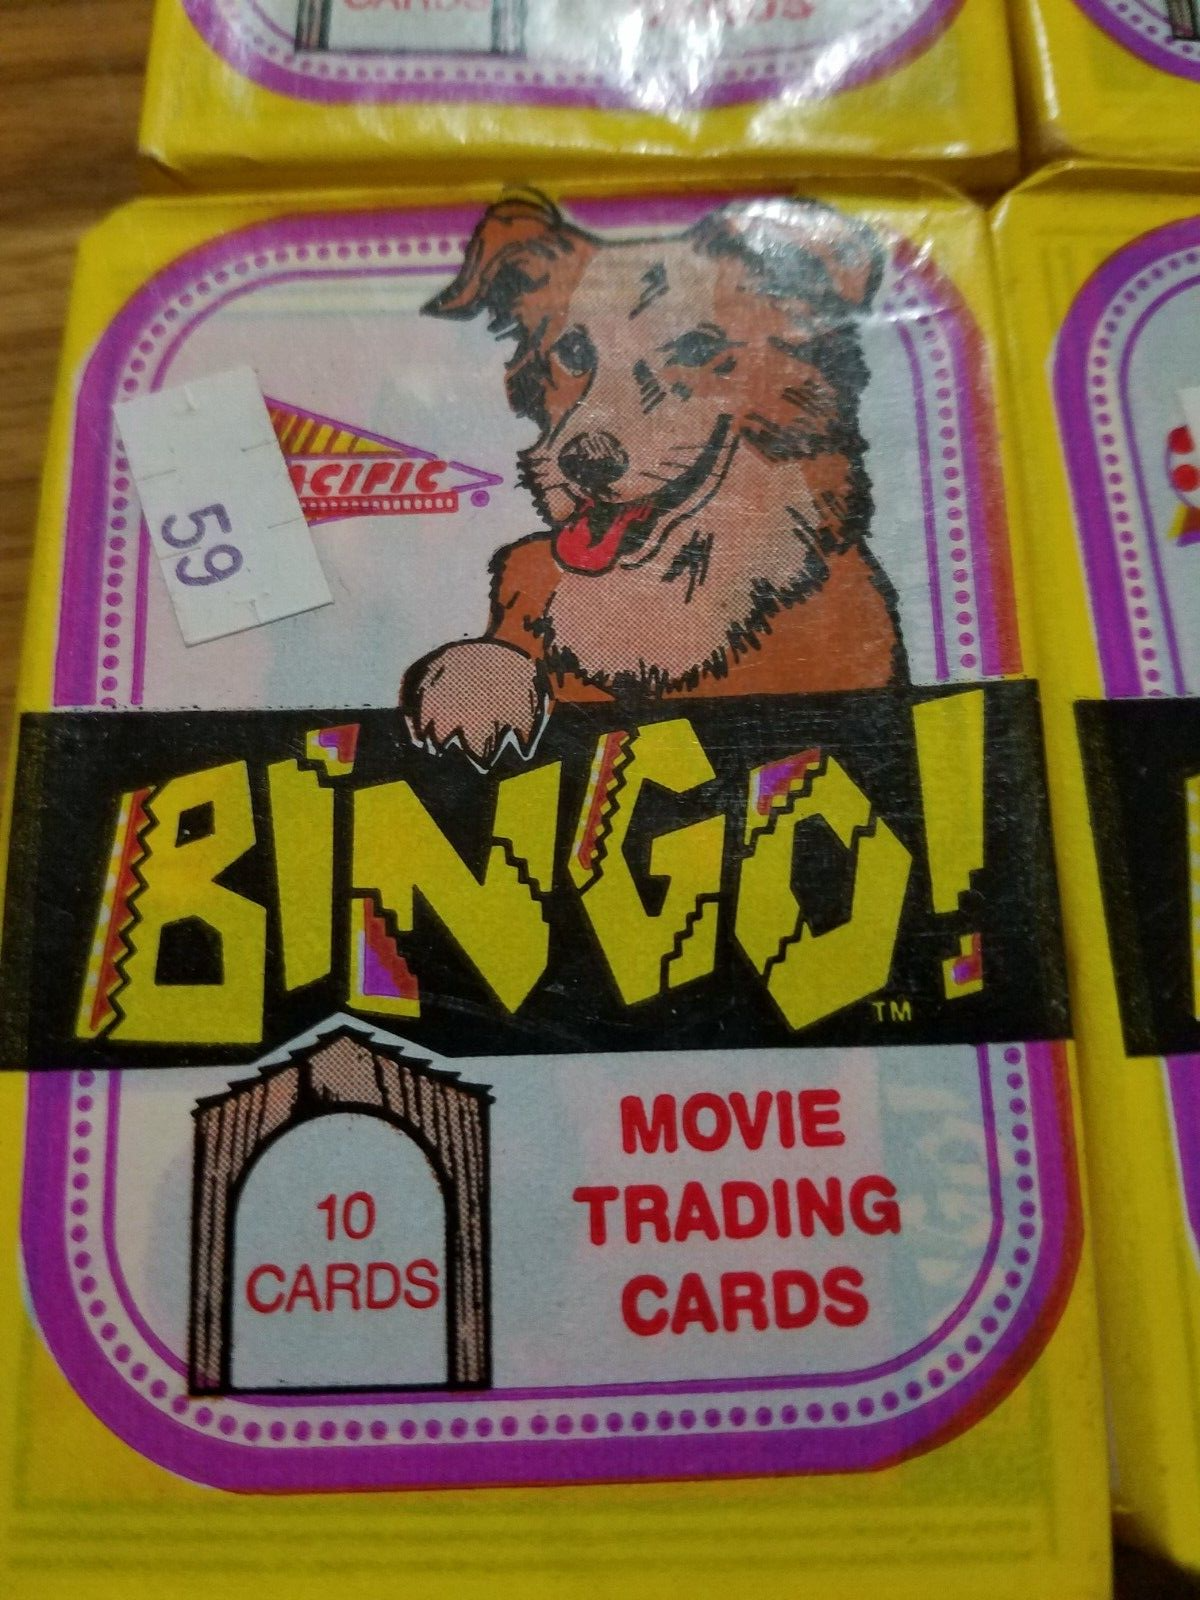 (1) Onew NEW Pack - 1991 Bingo Movie Trading Cards 10 Cards Each By Pacific Tri Star